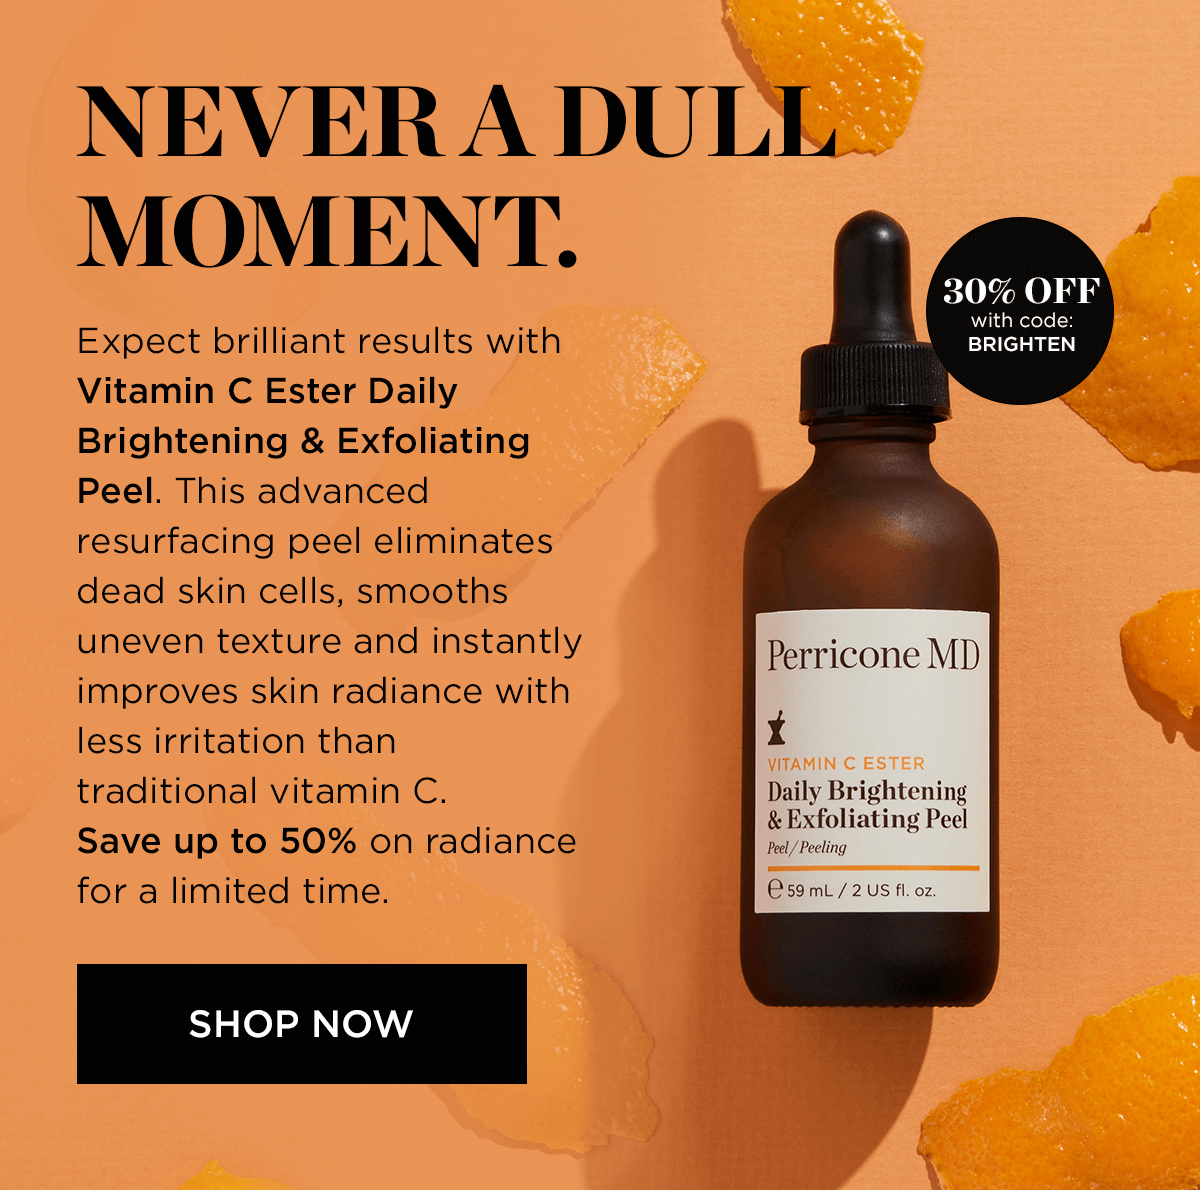 NEVERA DULL: MOMENT. Expect brilliant results with Vitamin C Ester Daily Brightening Exfoliating Peel. This advanced resurfacing peel eliminates dead skin cells, smooths uneven texture and instantly improves skin radiance with less irritation than traditional vitamin C. Save up to 50% on radiance for a limited time. SHOP NOW 30% OFF with code: BRIGHTEN Perricone MDD 1 Daily Brightening Exfoliating Peel Peel Peeling 59mL2Usfl.oz 